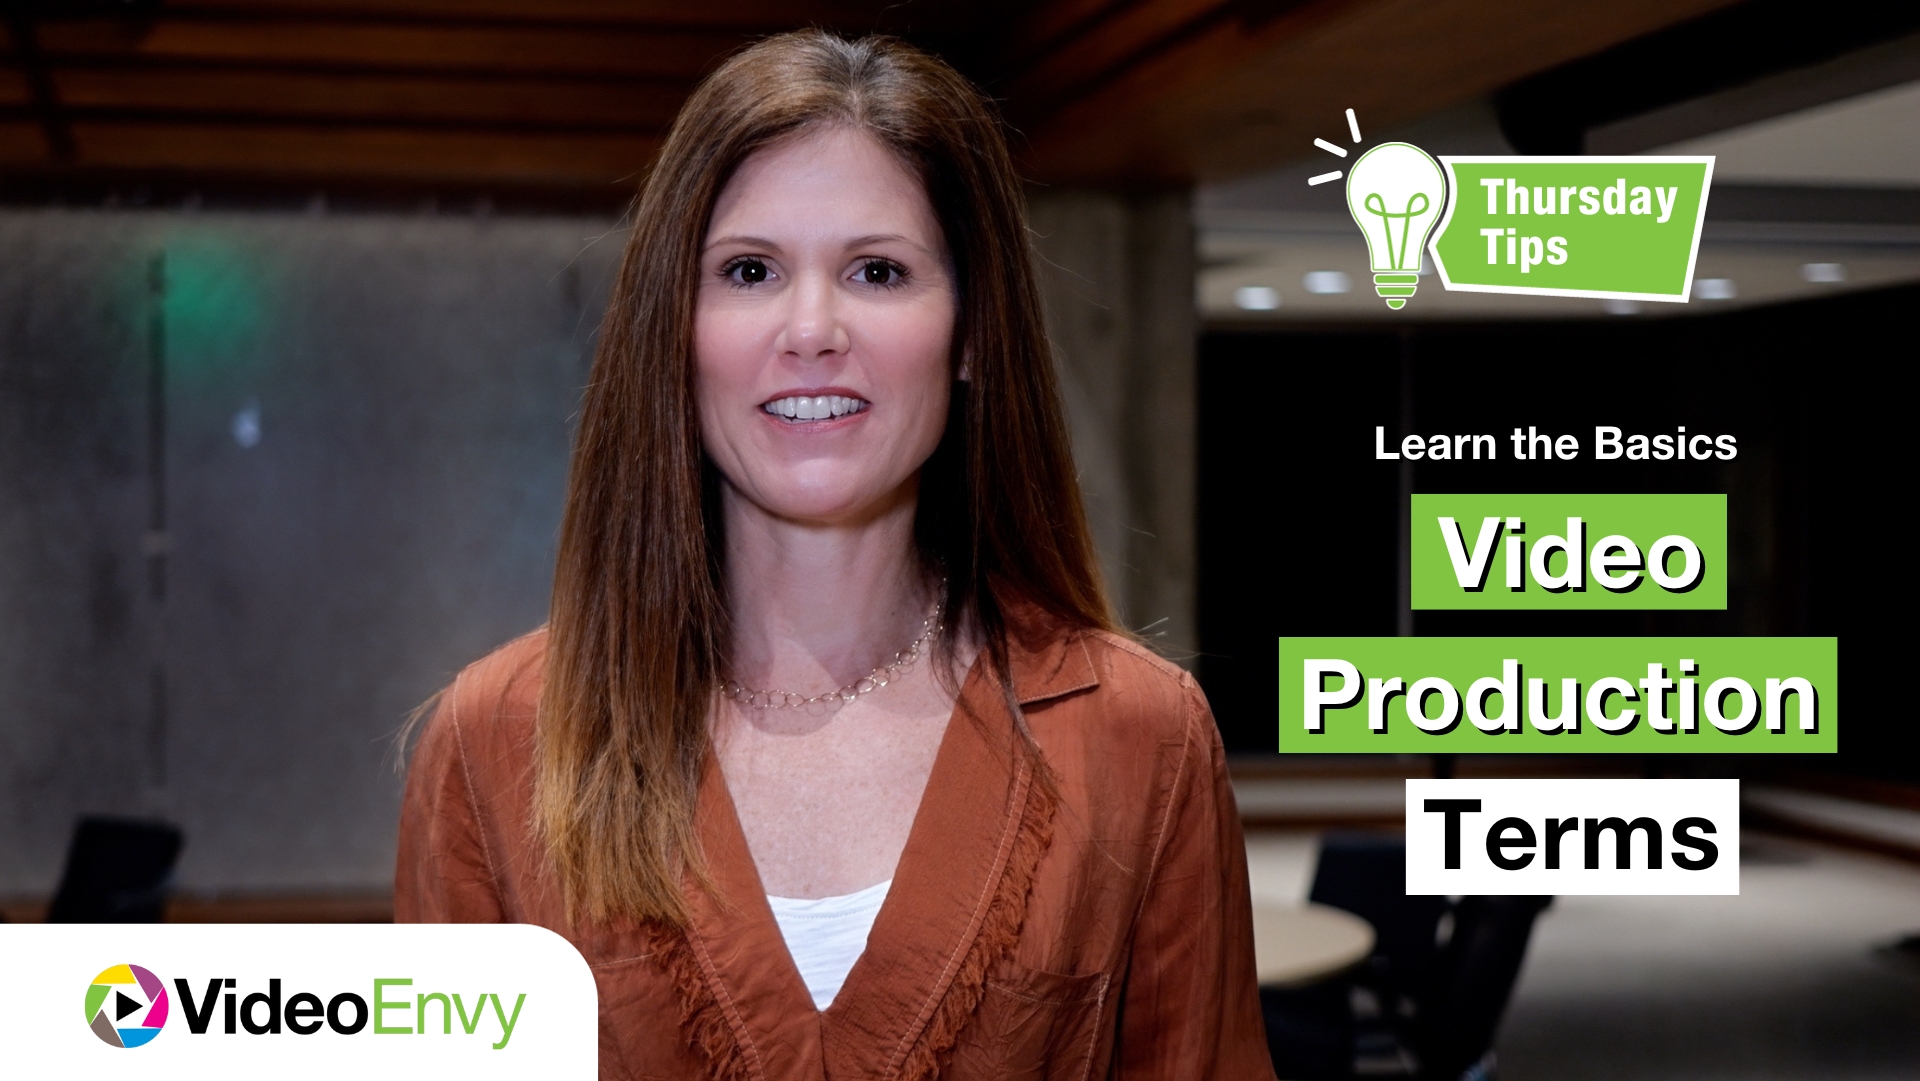 Thursday Tips: Video Production Terms